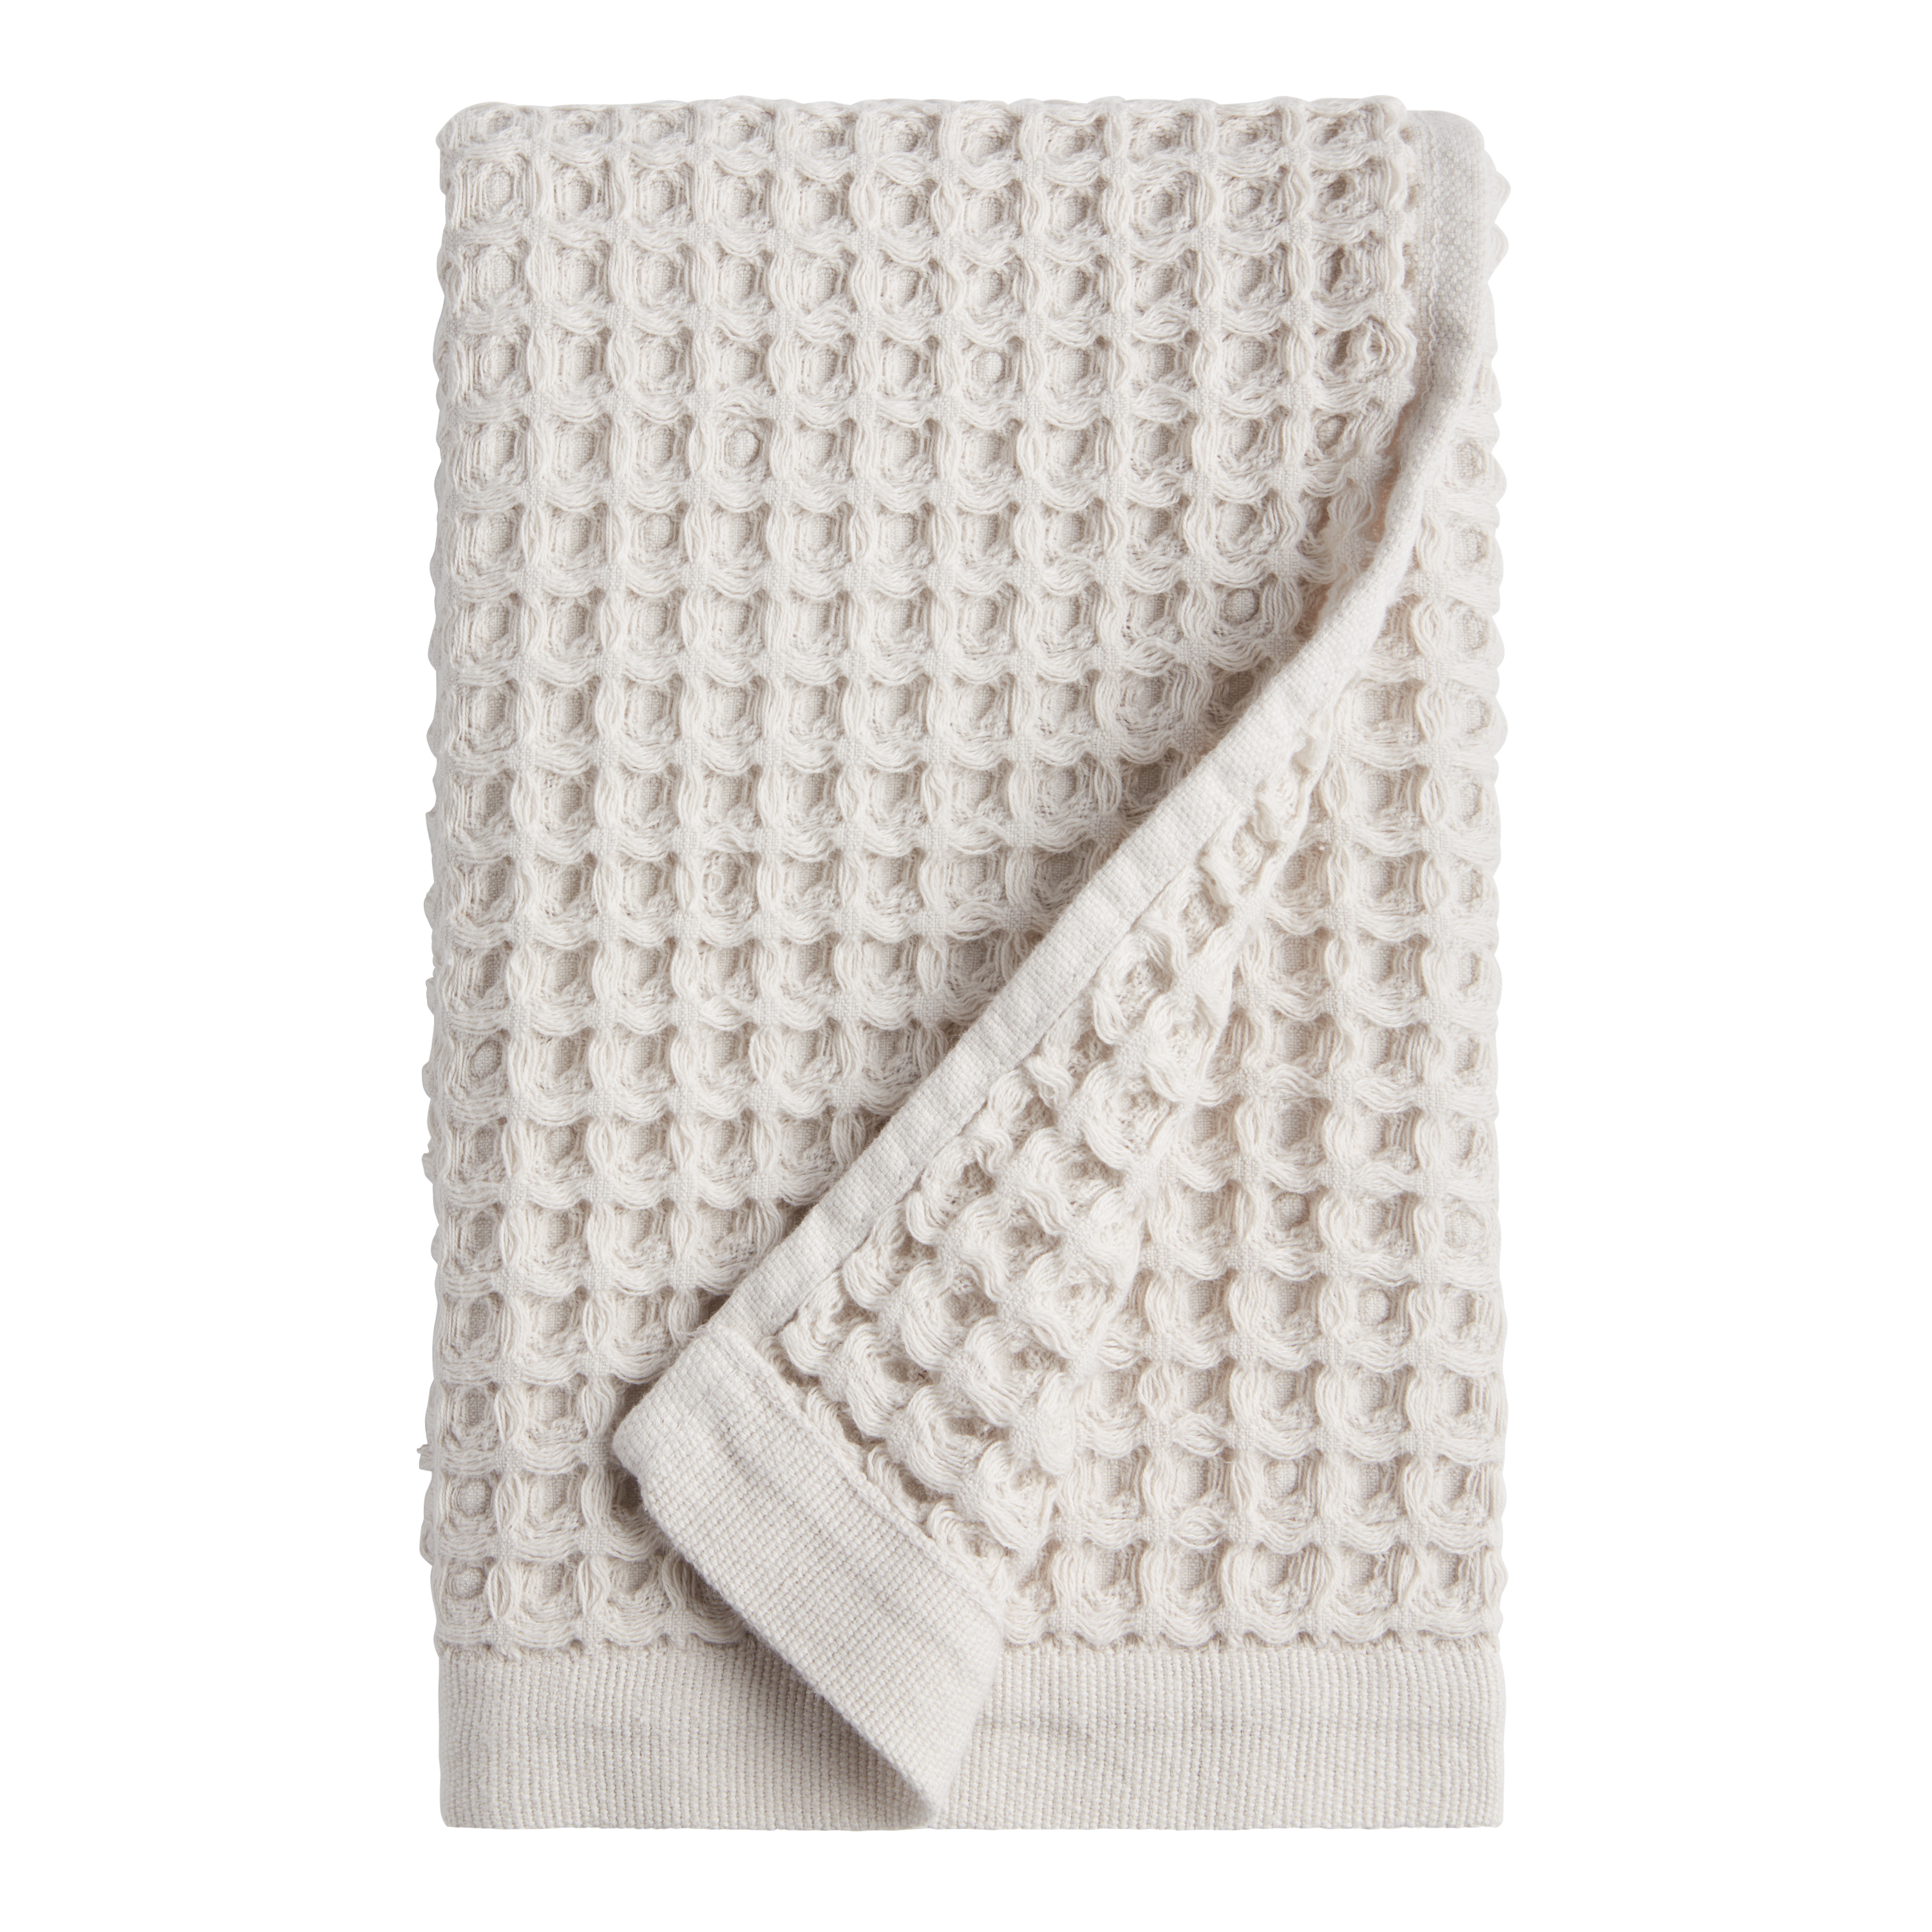 Cozy Earth Waffle Hand Towels Review - Why We Love the Cozy Earth Waffle  Hand Towels